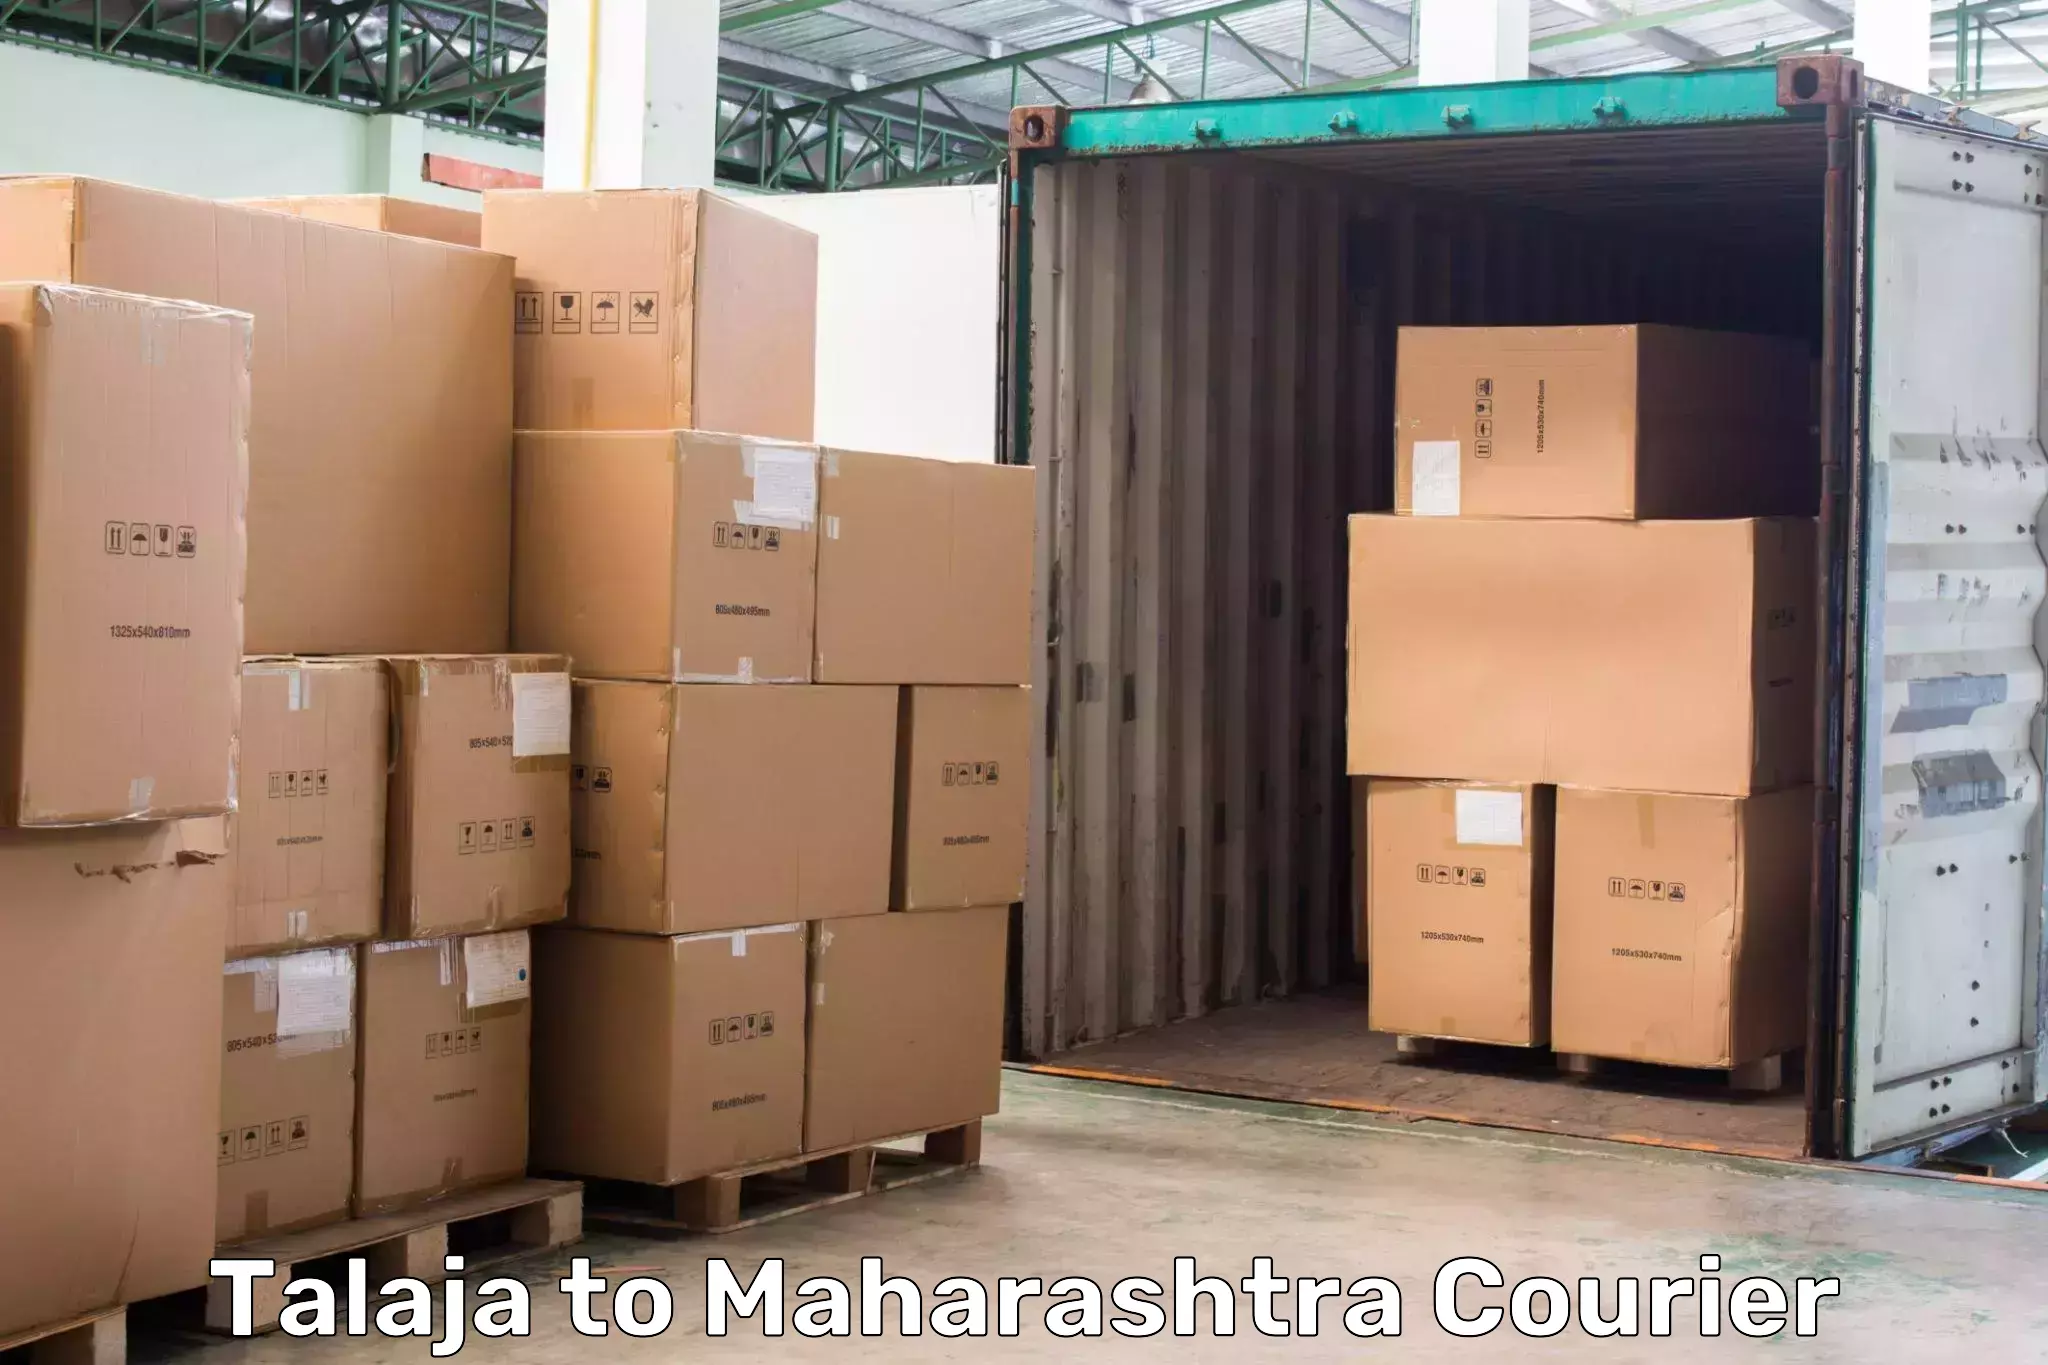 Courier service booking Talaja to Bhiwandi